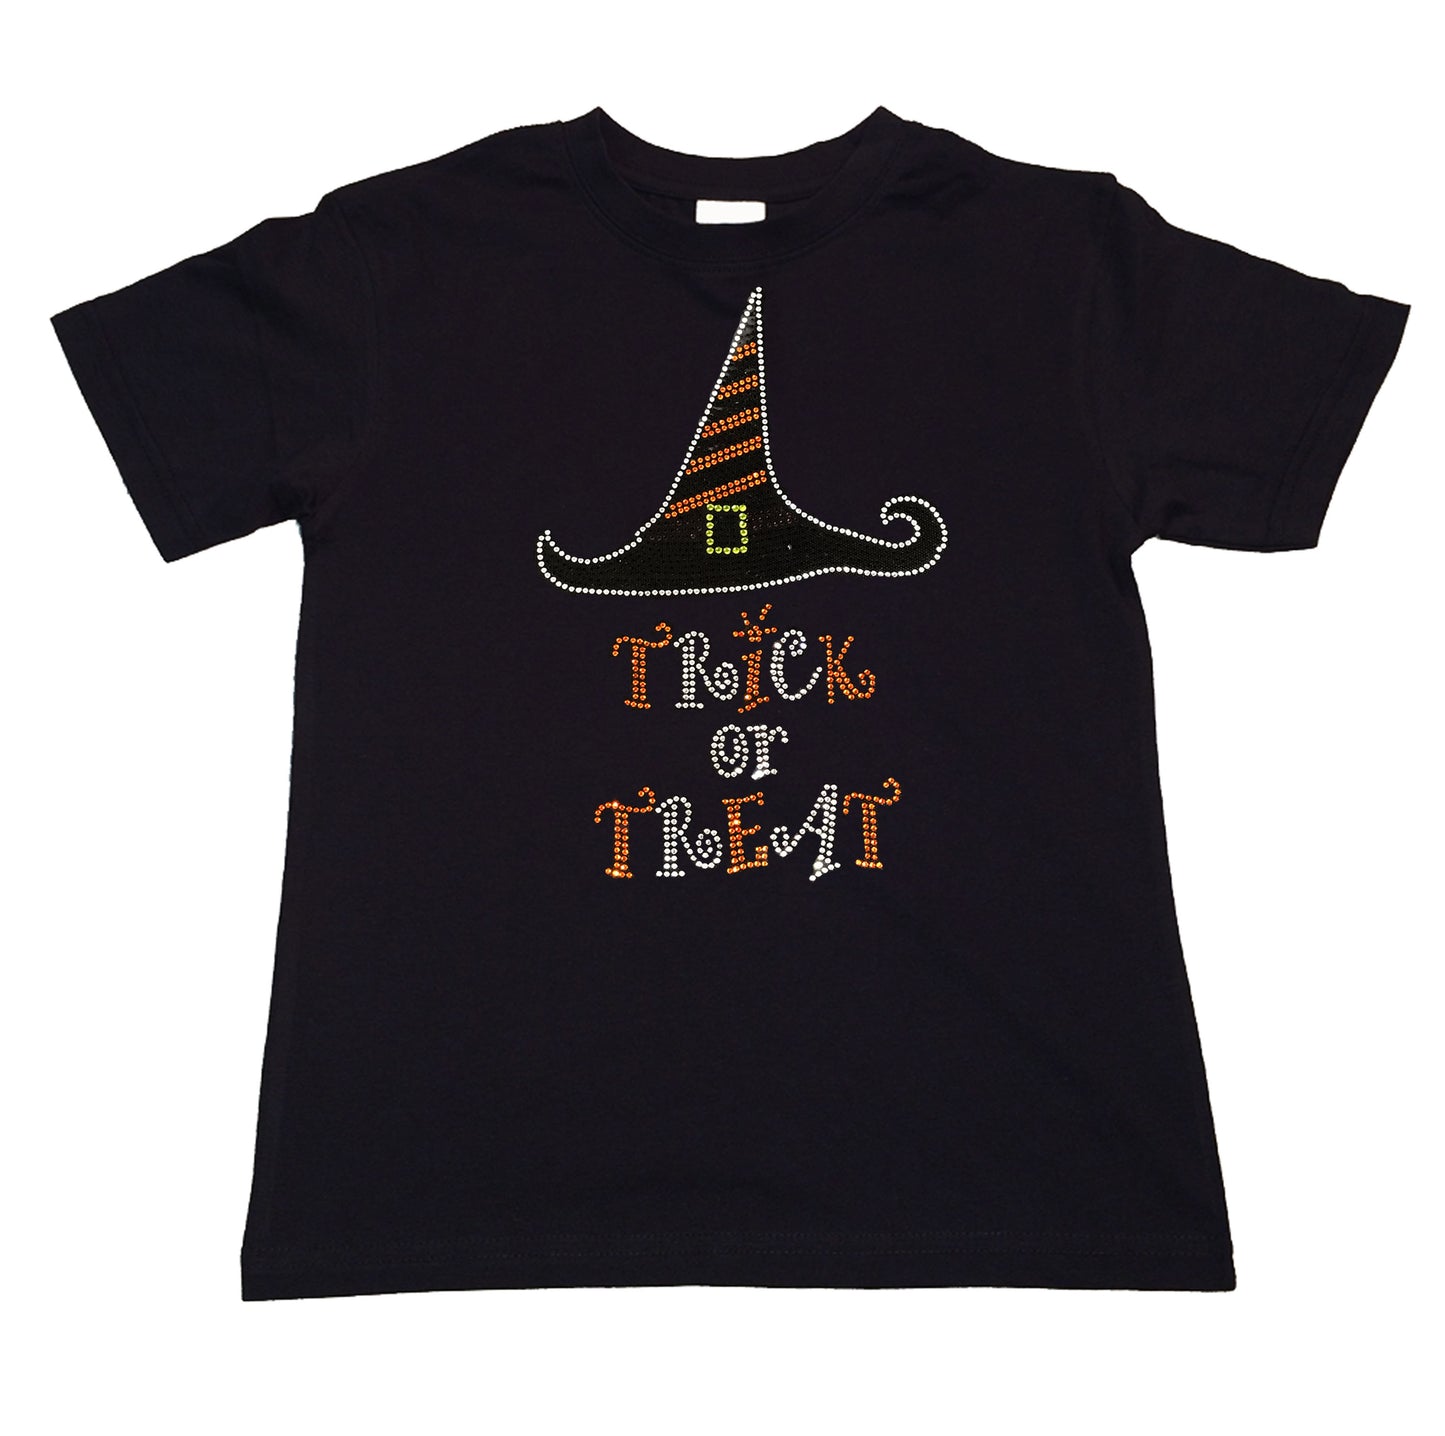 Girl's Rhinestone T-Shirt " Trick or Treat with Witch Hat " for Halloween